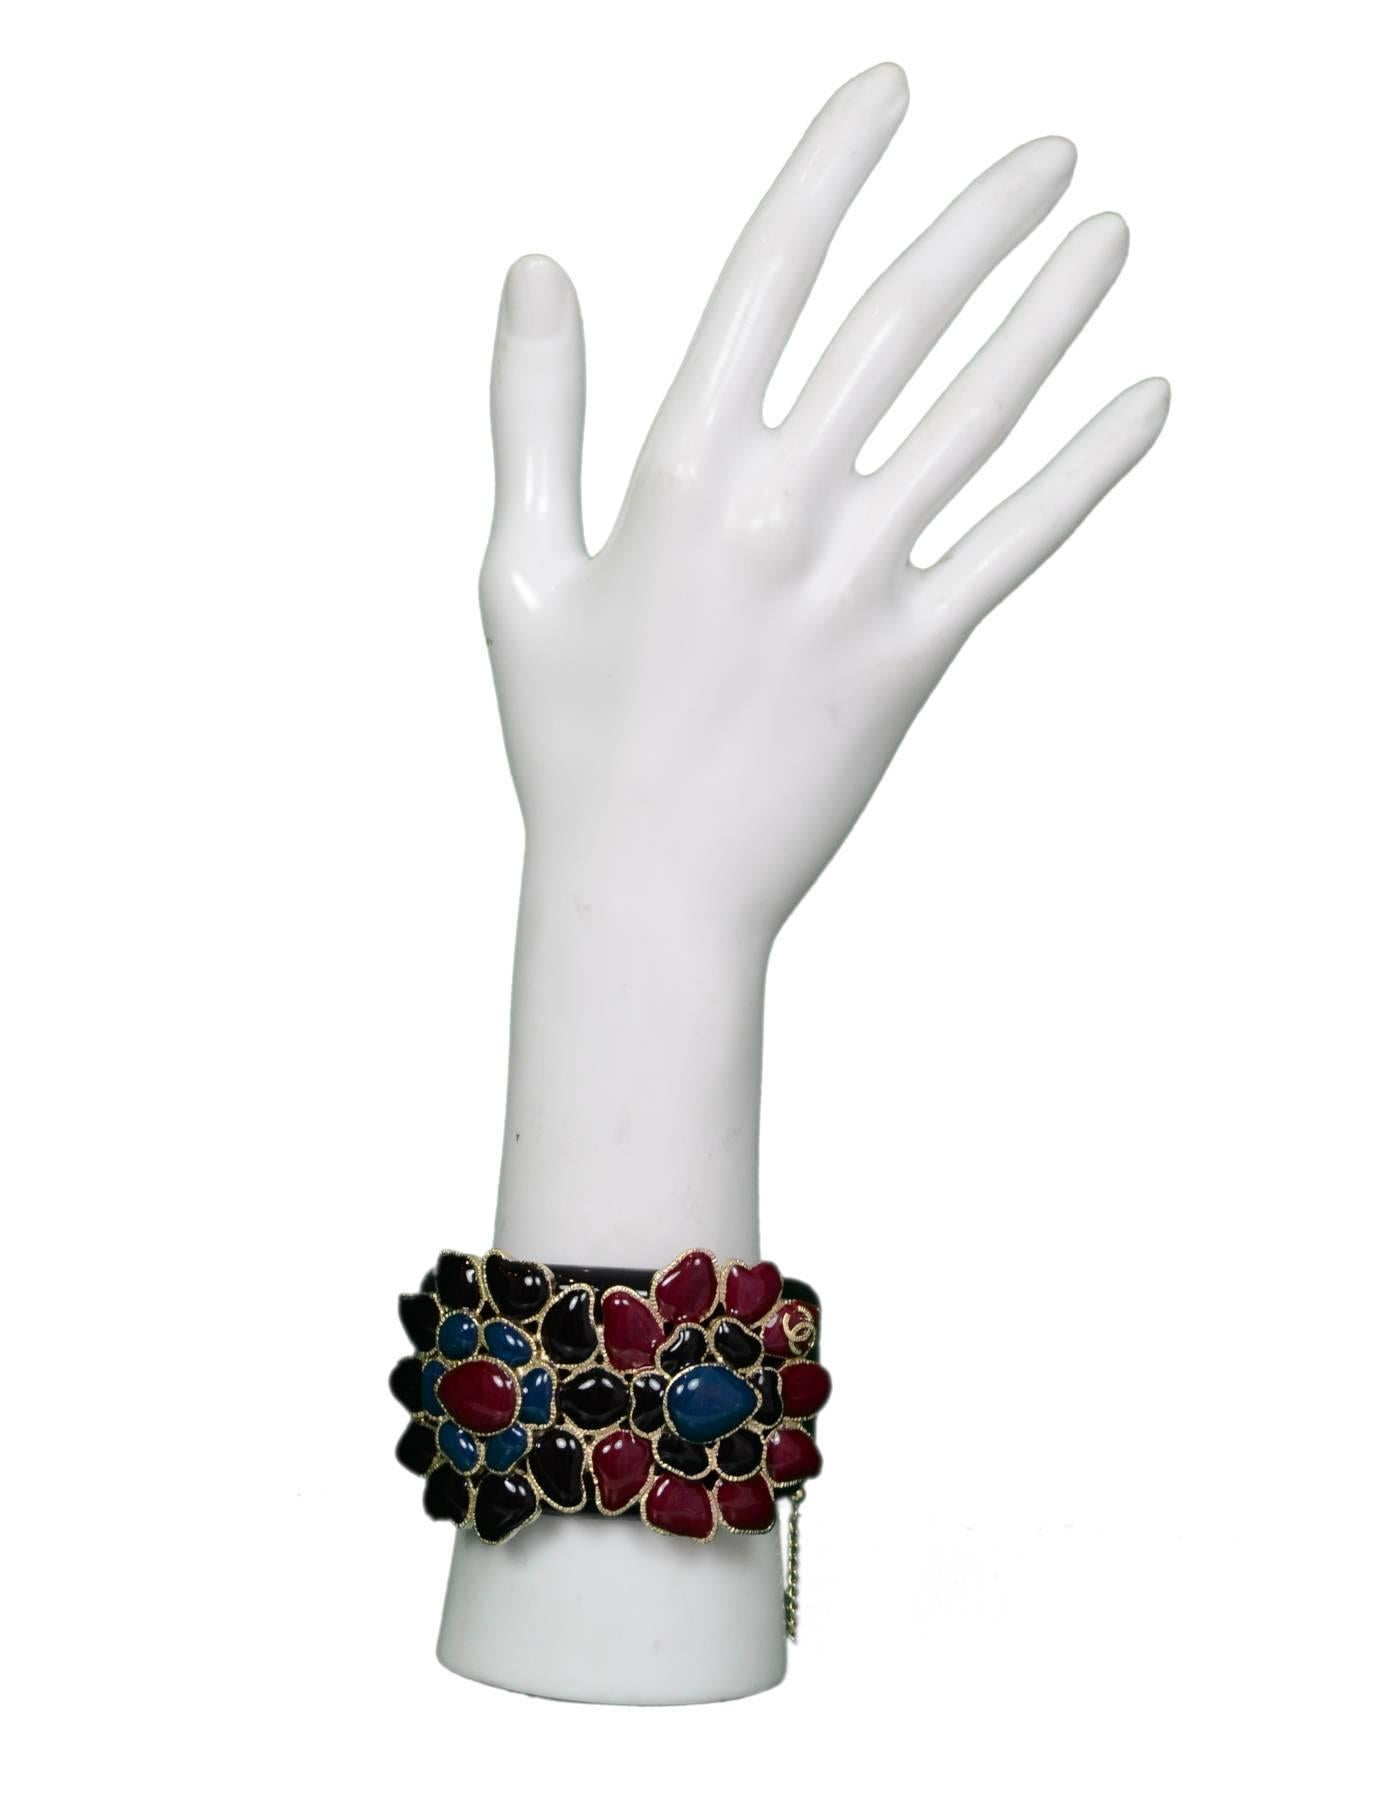 Chanel Black Resin & Glass Flowers Cuff Bracelet 

Made In: Italy
Year of Production: 2015
Materials: Resin, glass, metal
Closure/Opening: Magnetic Closure with Safety Chain
Stamp: B 15 CC C Made in Italy
Overall Condition: Excellent pre-owned